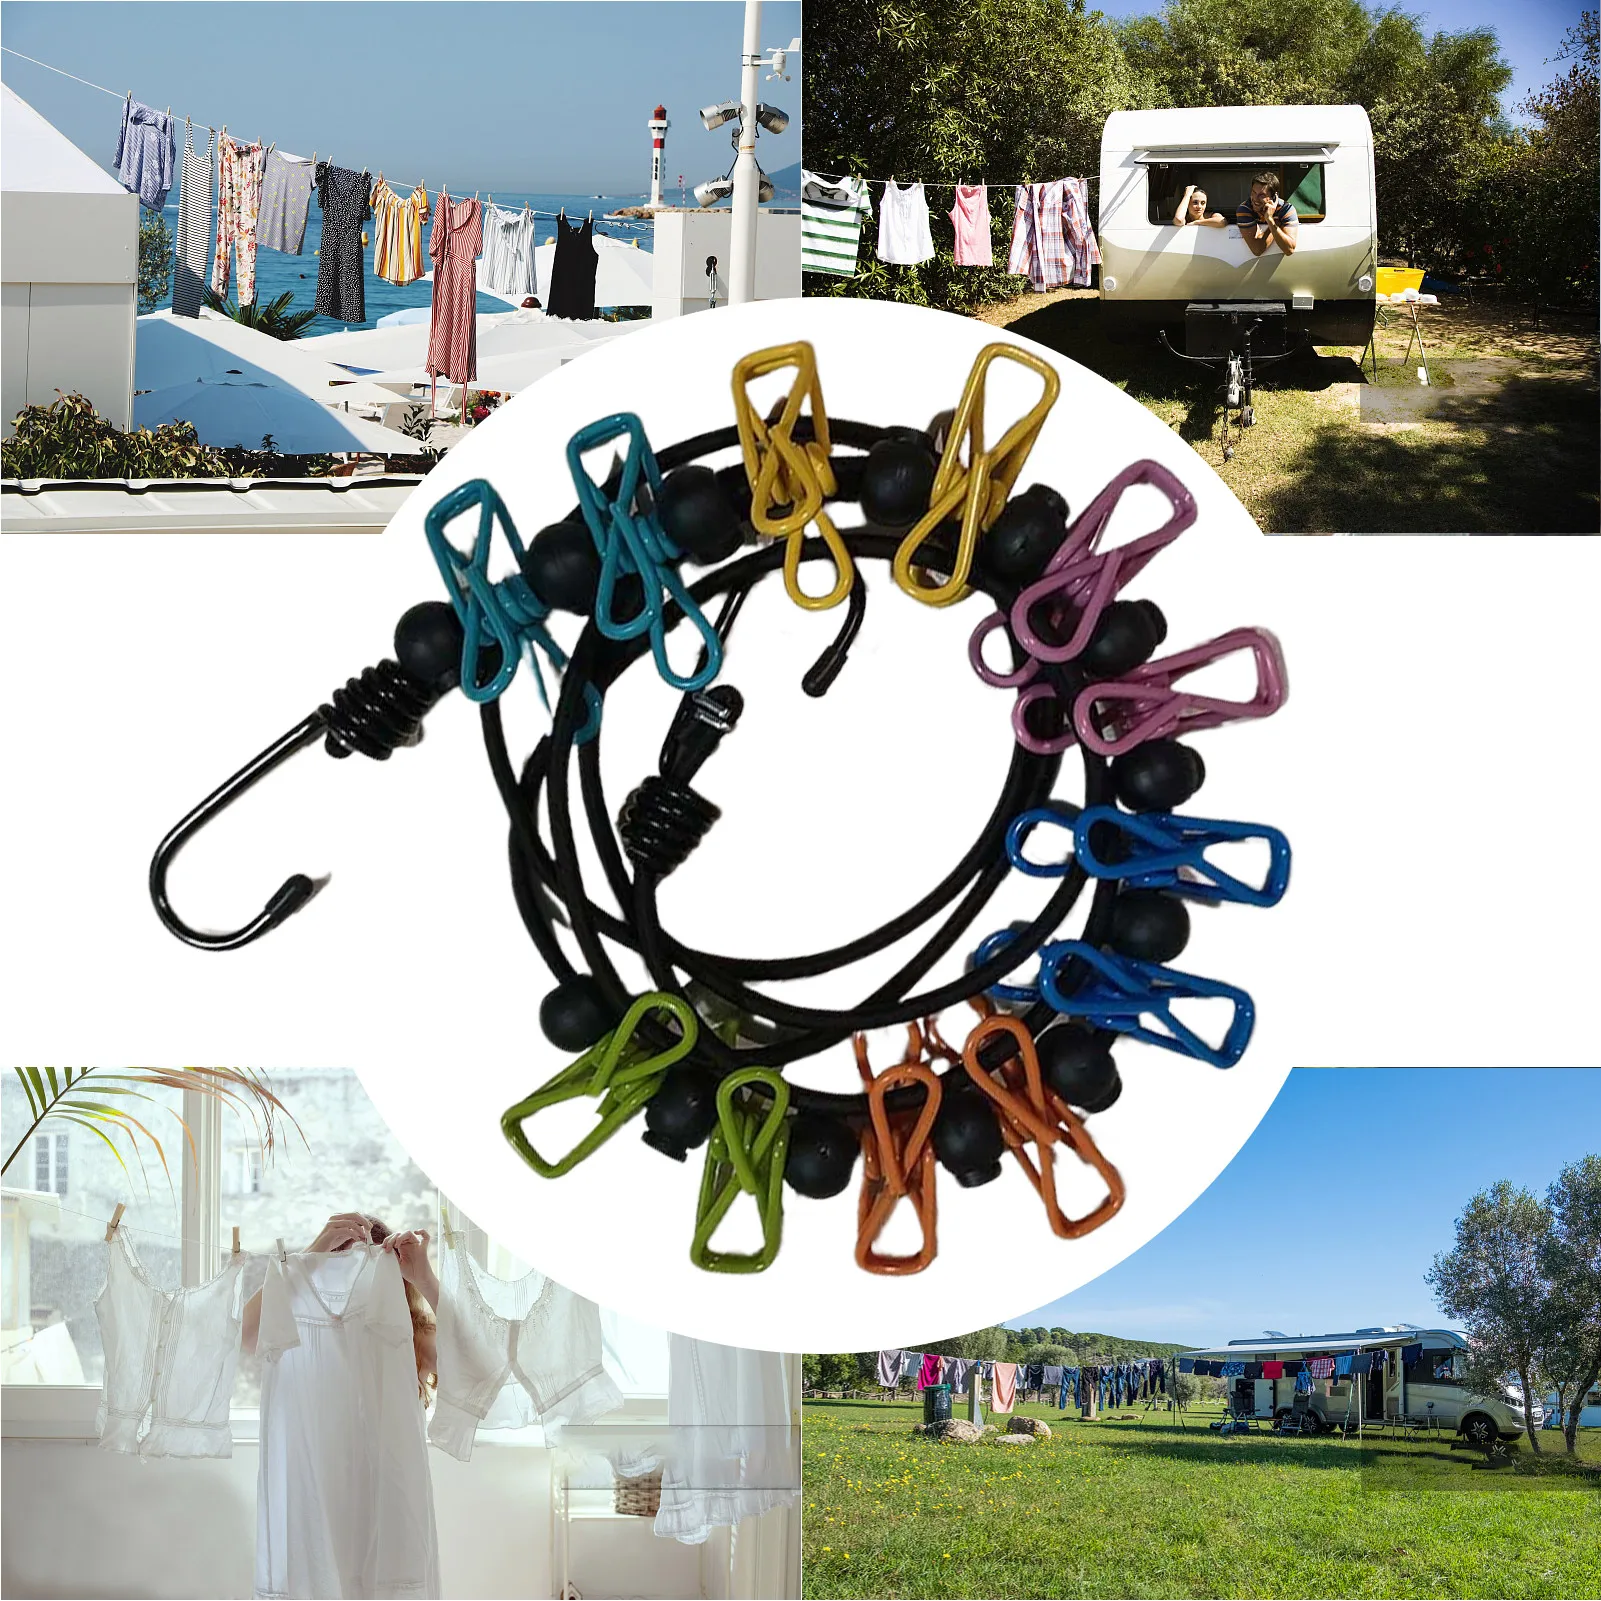 Retractable Travel Clothesline Stretchy Clothes Line with 12 Clothespins Indoor Laundry Drying Rope Outdoor Camping RV Road Trip